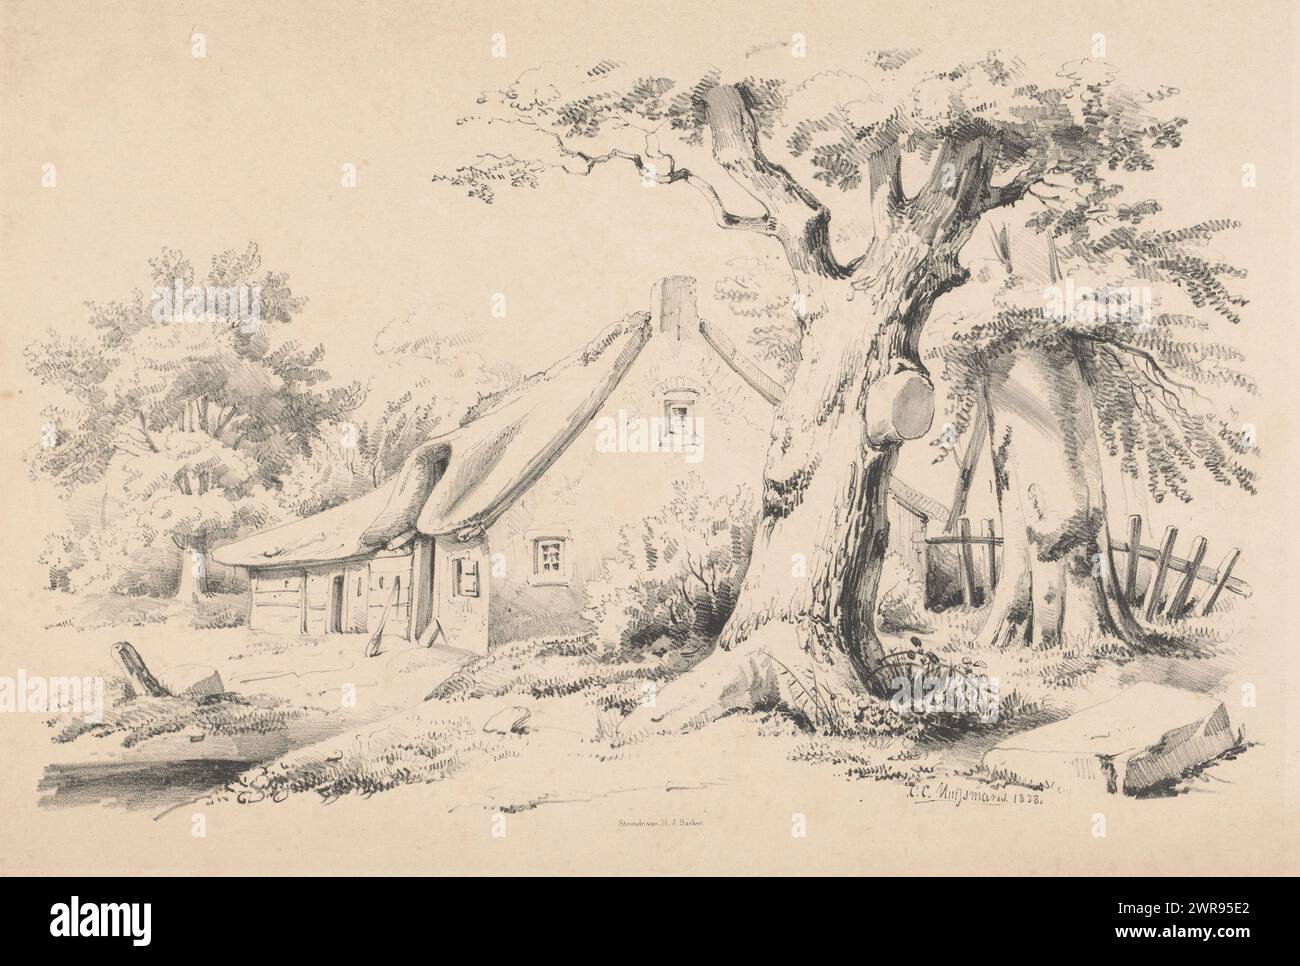 Farm and two trees, The Landscape (series title), Behind the trees is a fence., print maker: Constantinus Cornelis Huysmans, printer: Hilmar Johannes Backer, Dordrecht, 1838, paper, height 320 mm × width 500 mm, print Stock Photo